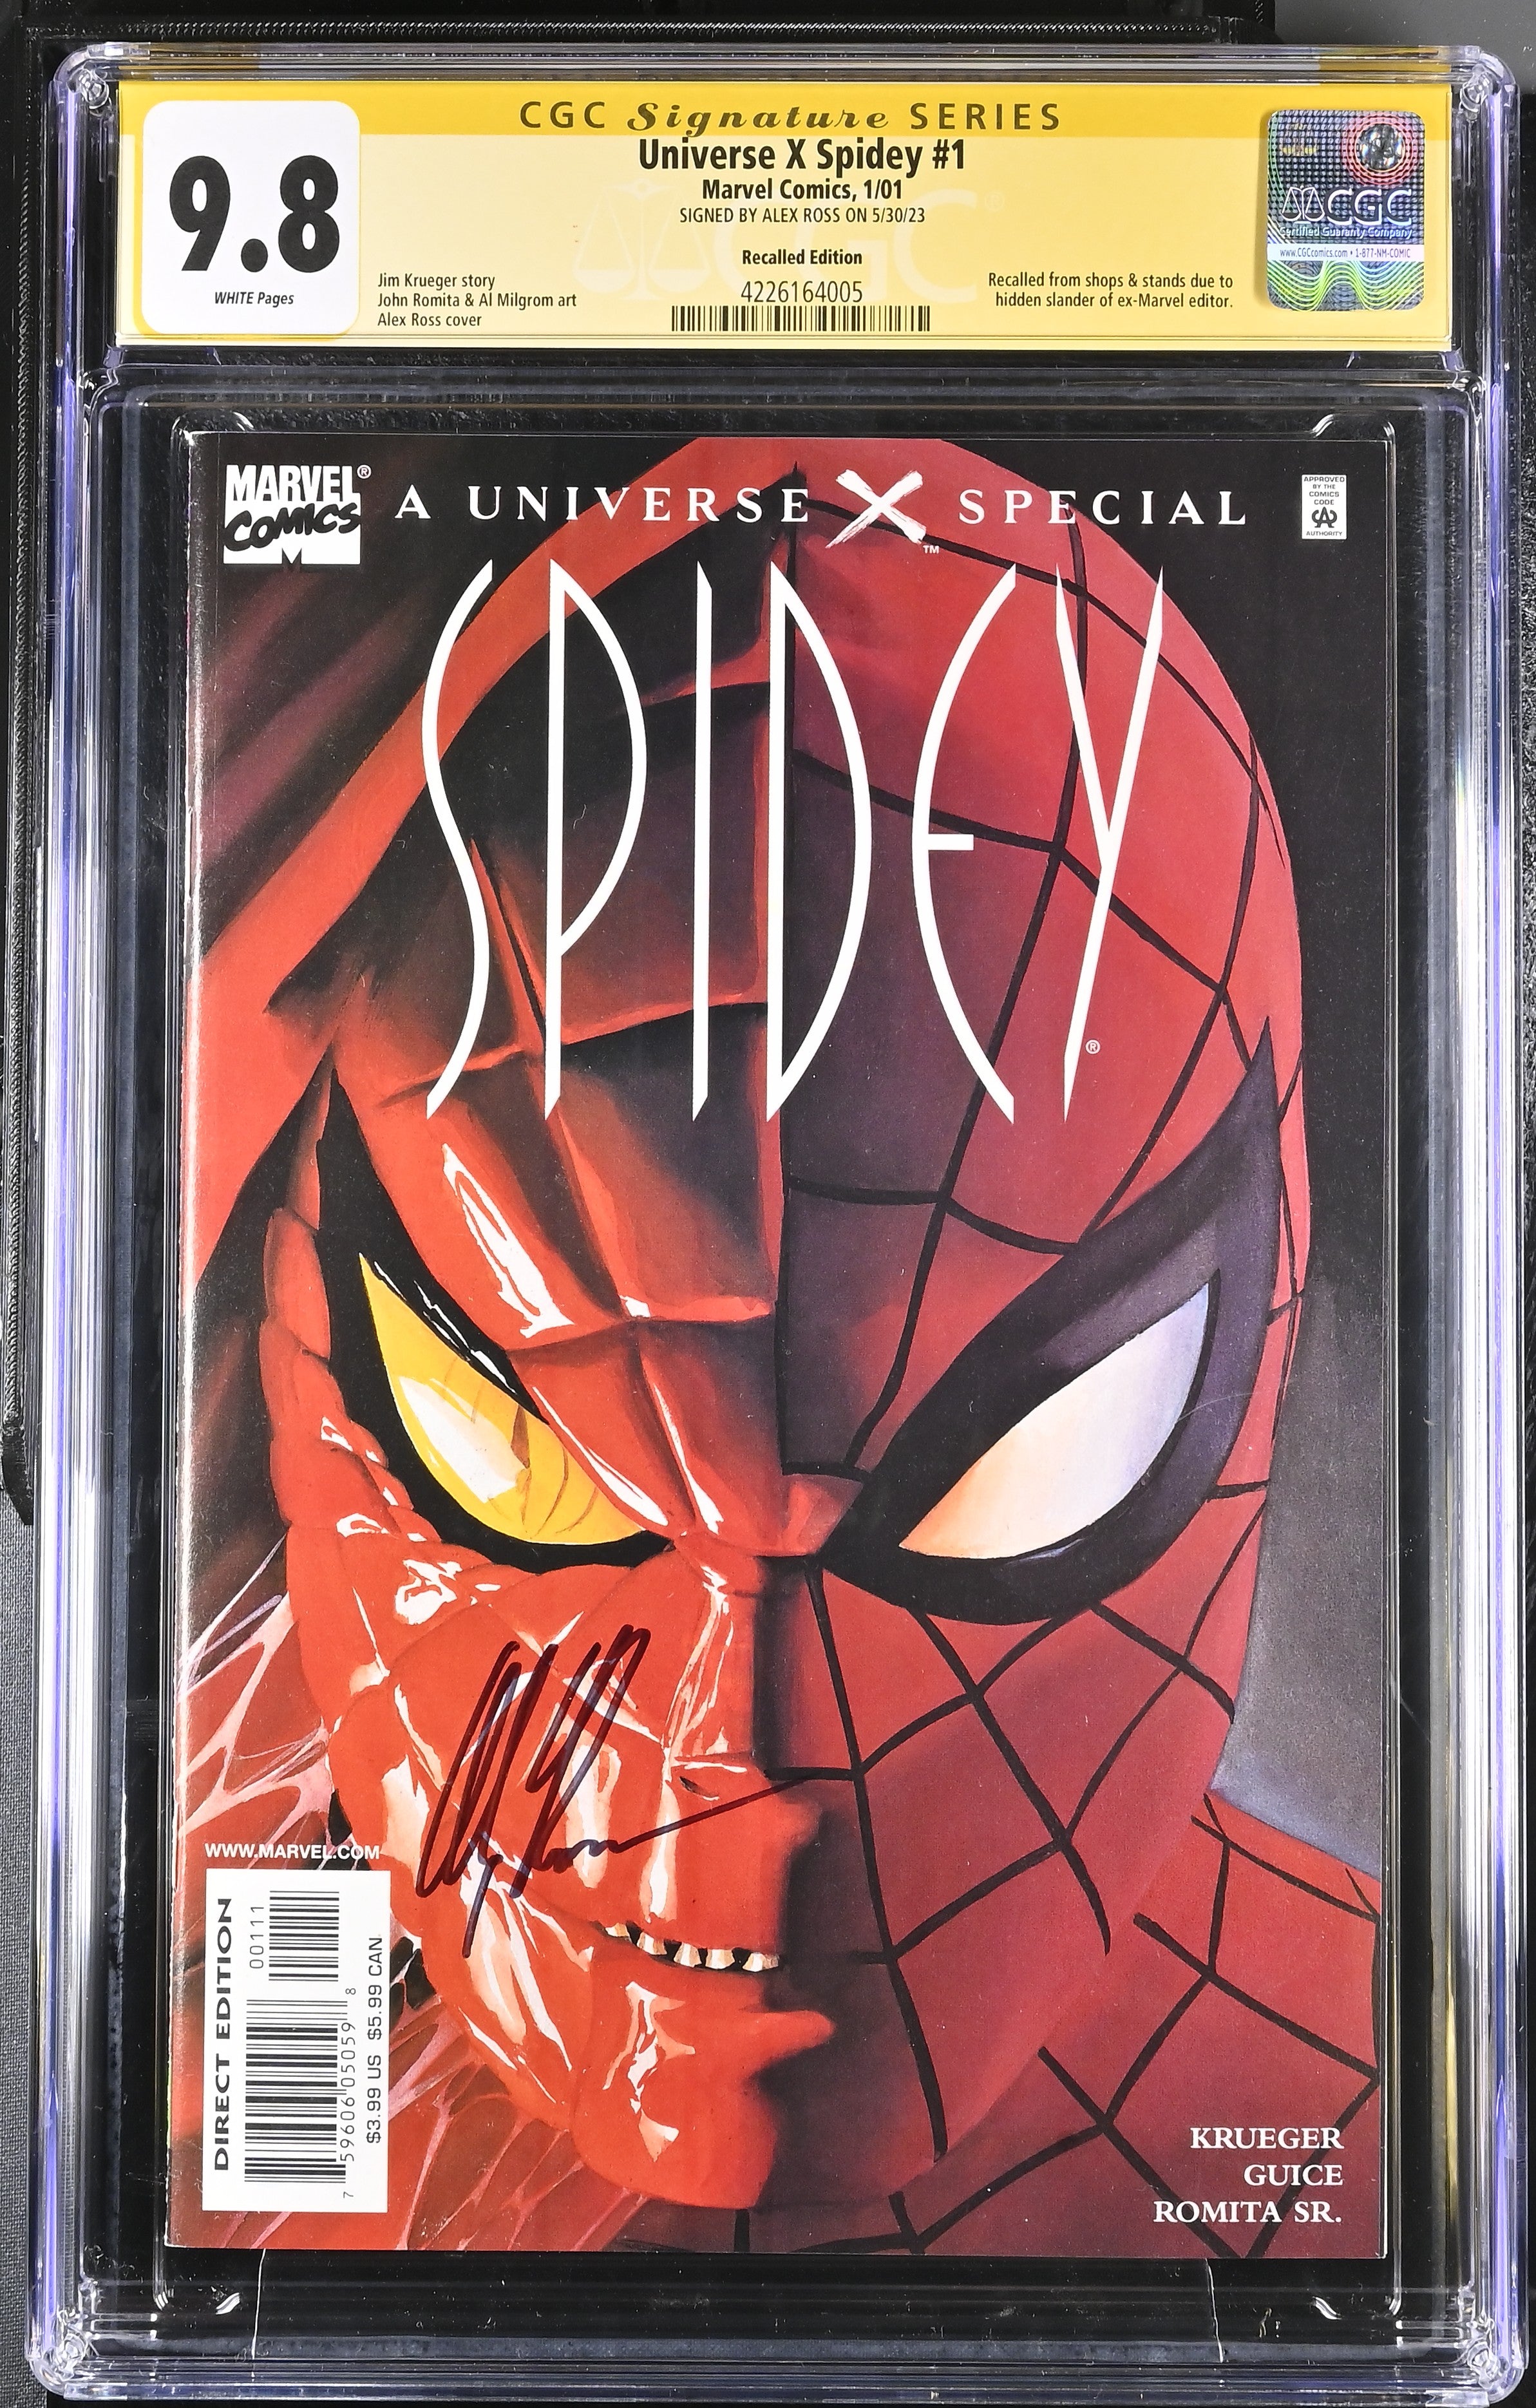 Universe X Spidey #1 (2001) CGC 9.8 Signed by Alex Ross Recalled Edition